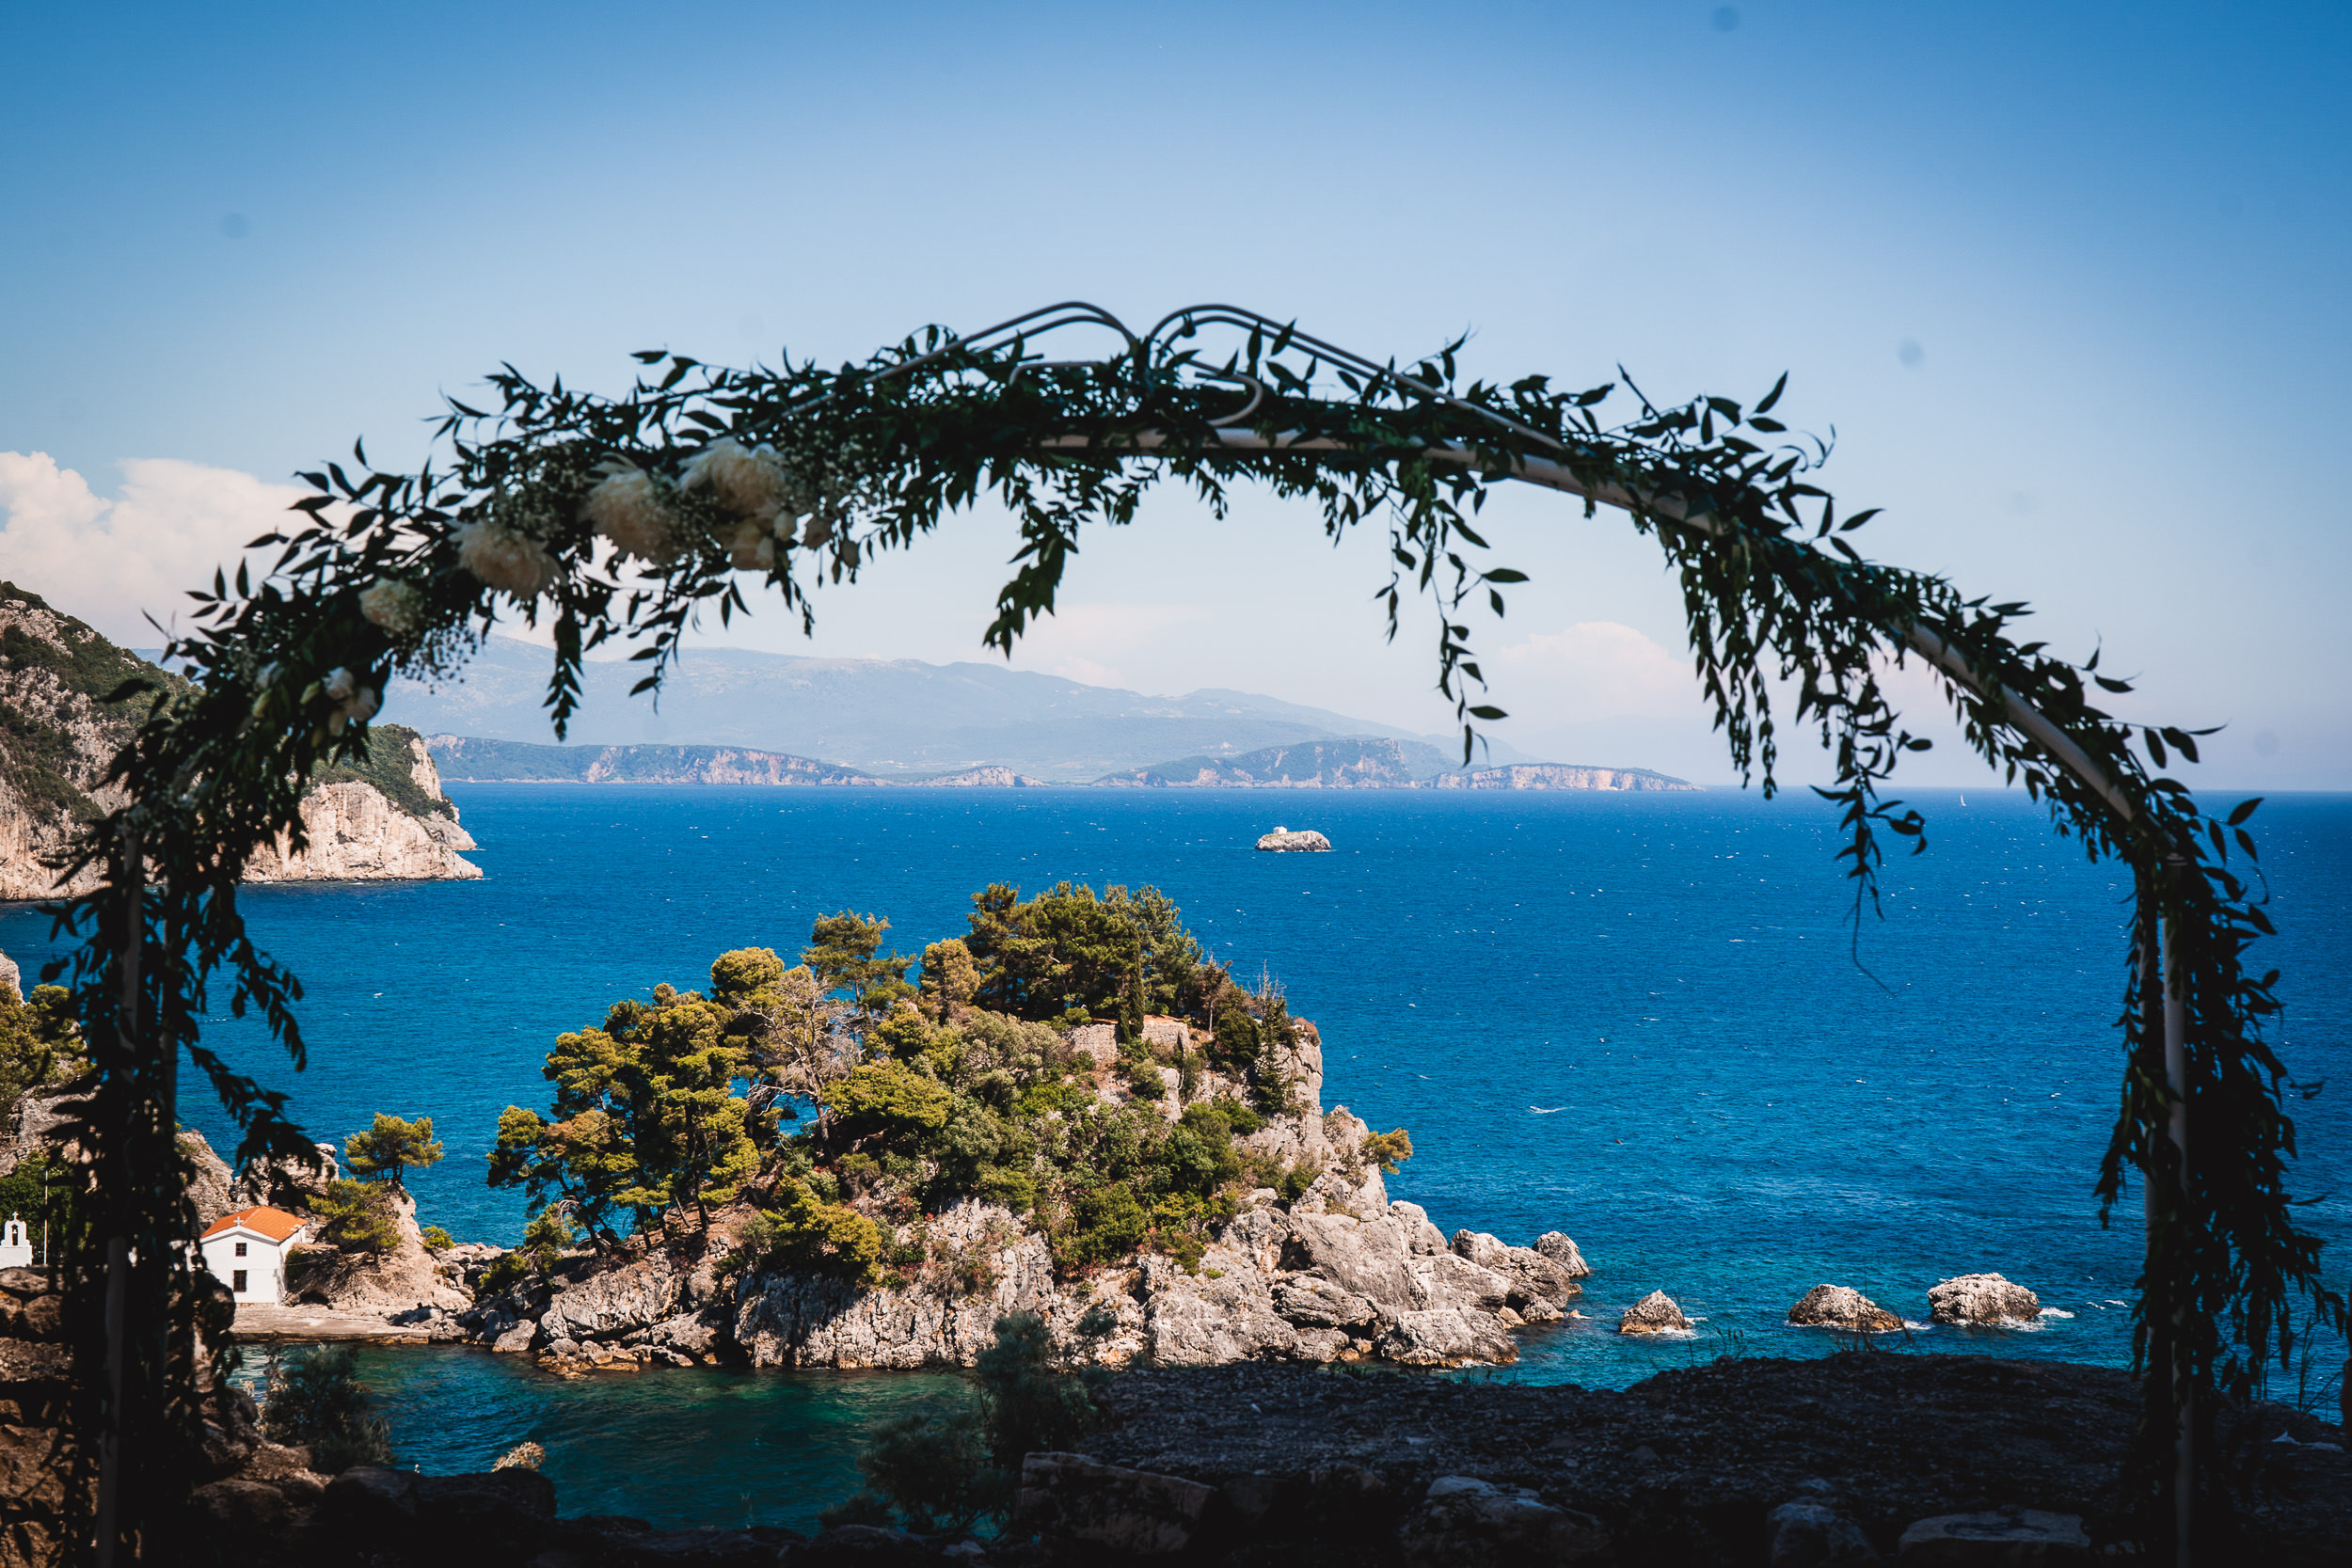 A bride posing for a wedding photo under a beautiful wedding arch overlooking the sea.